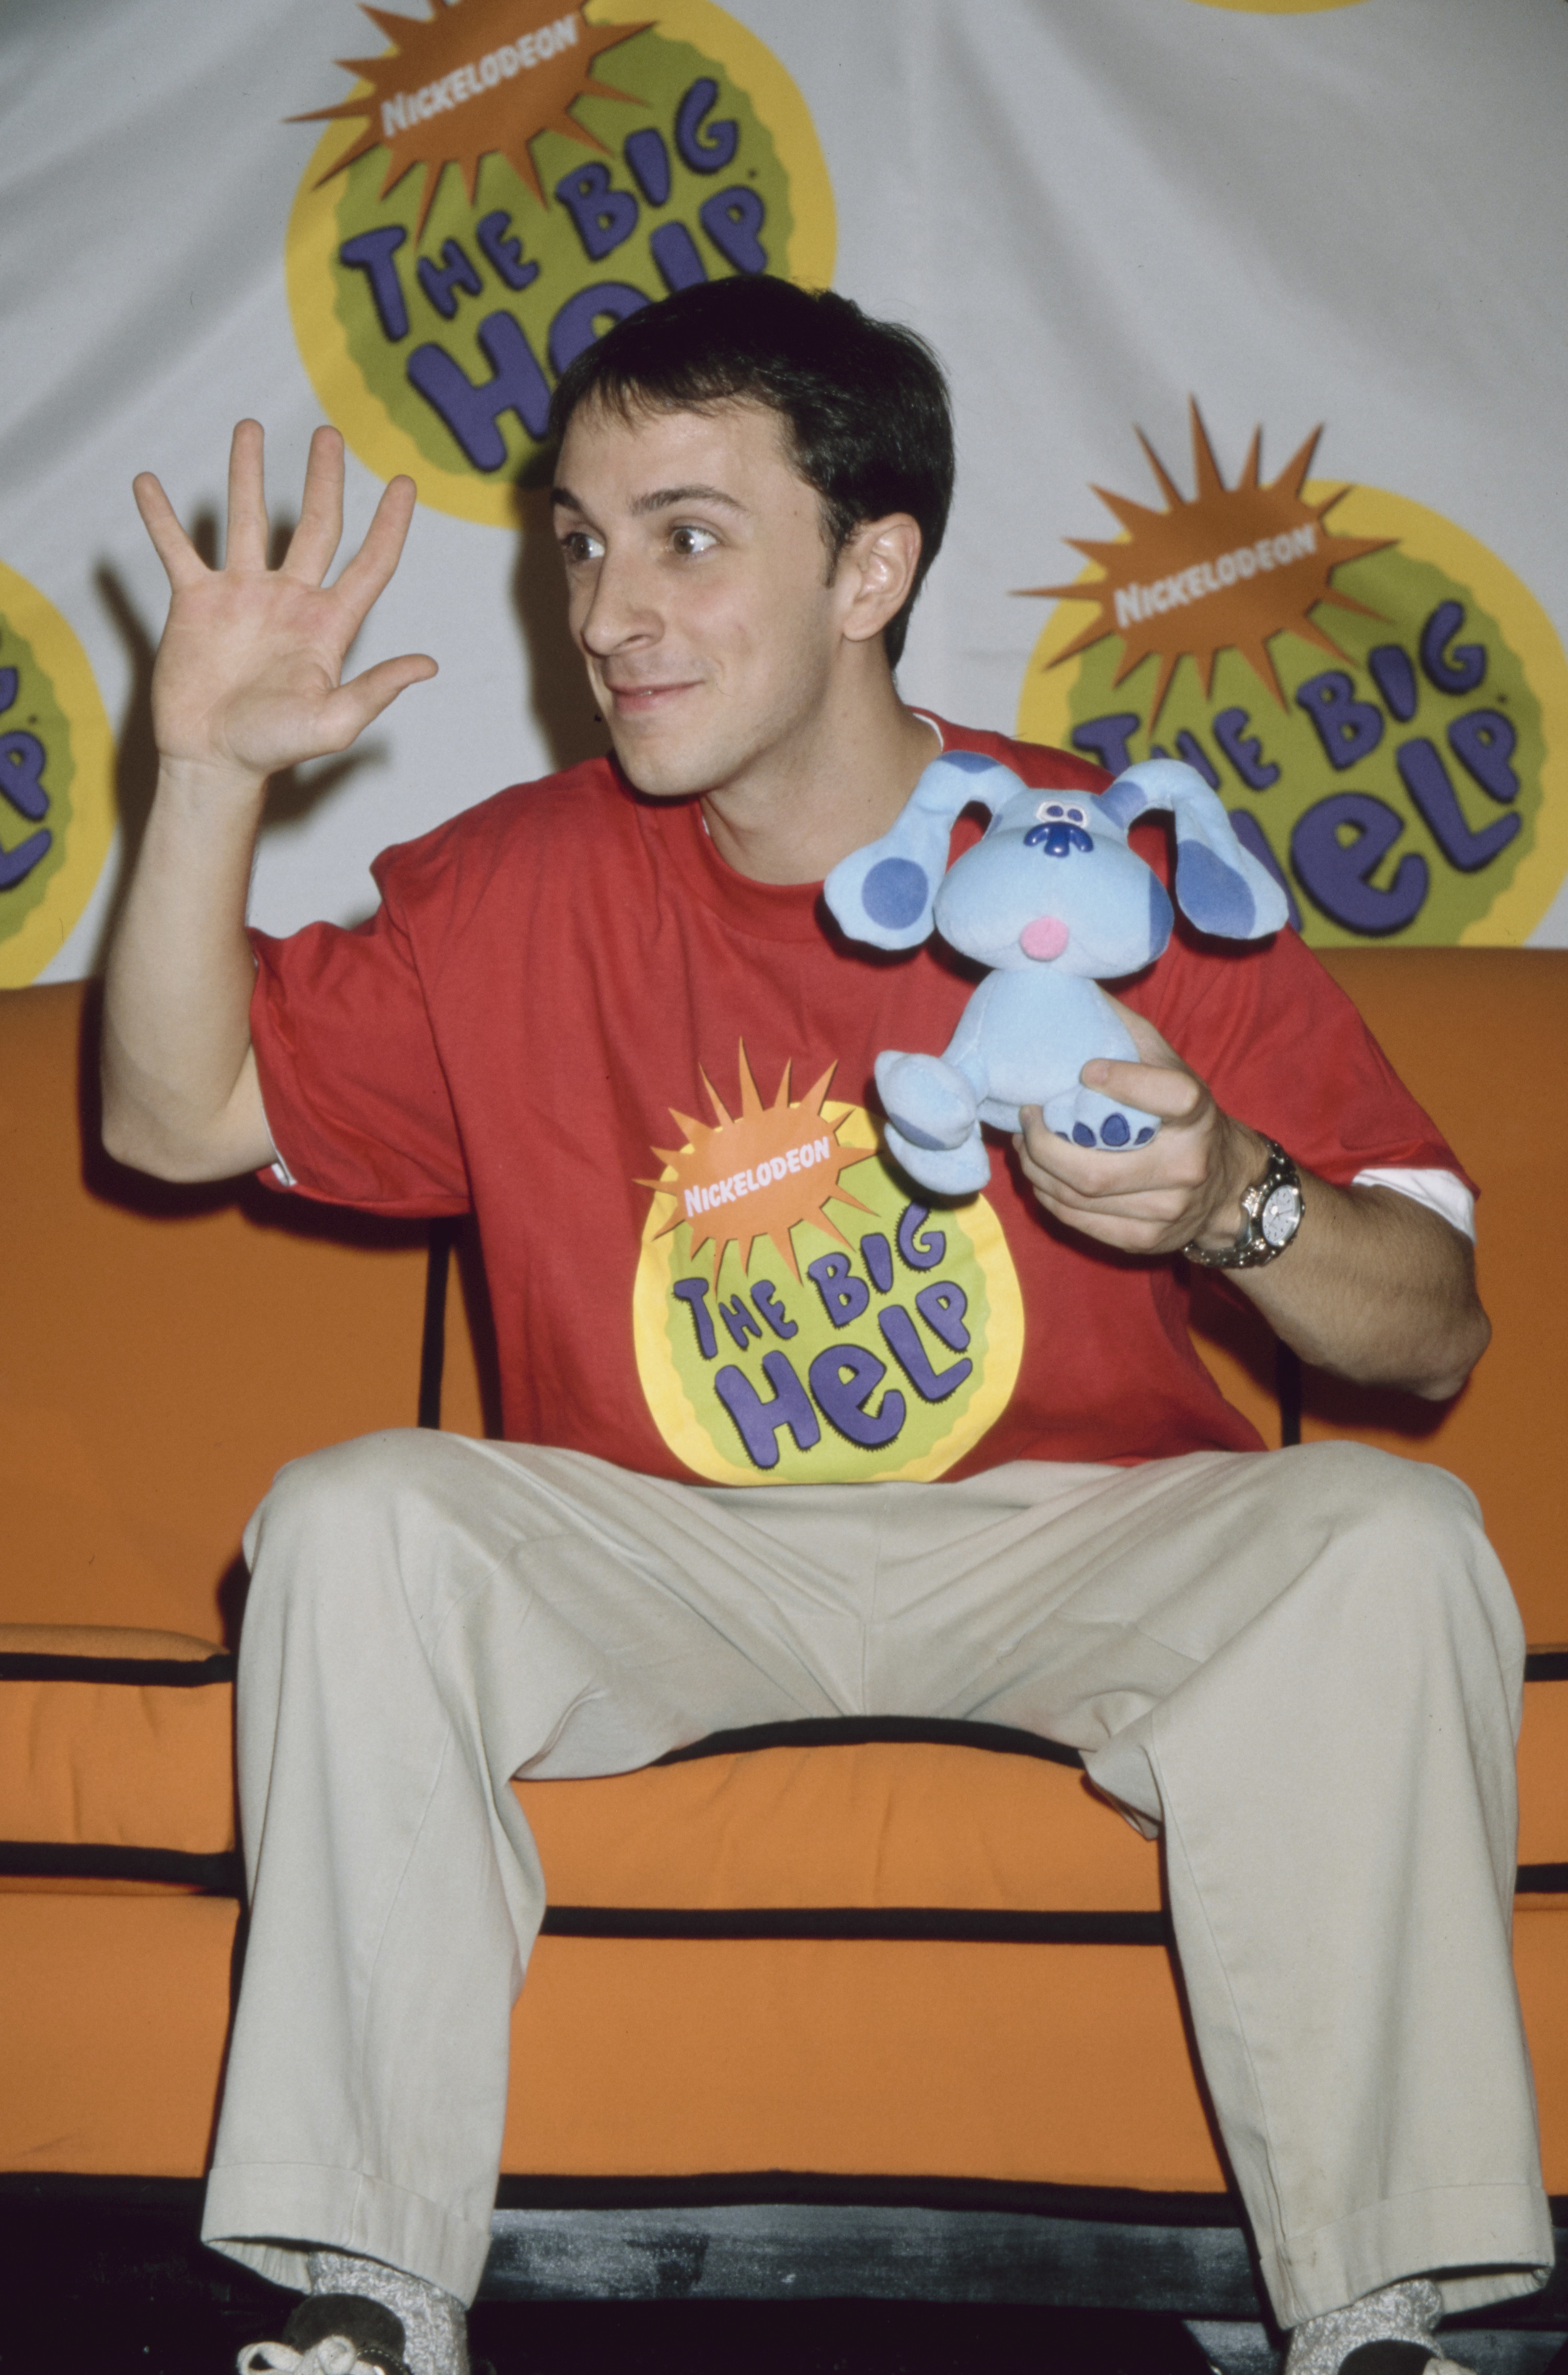 Steve Burns at a Nickelodeon event with a stuffed Blue